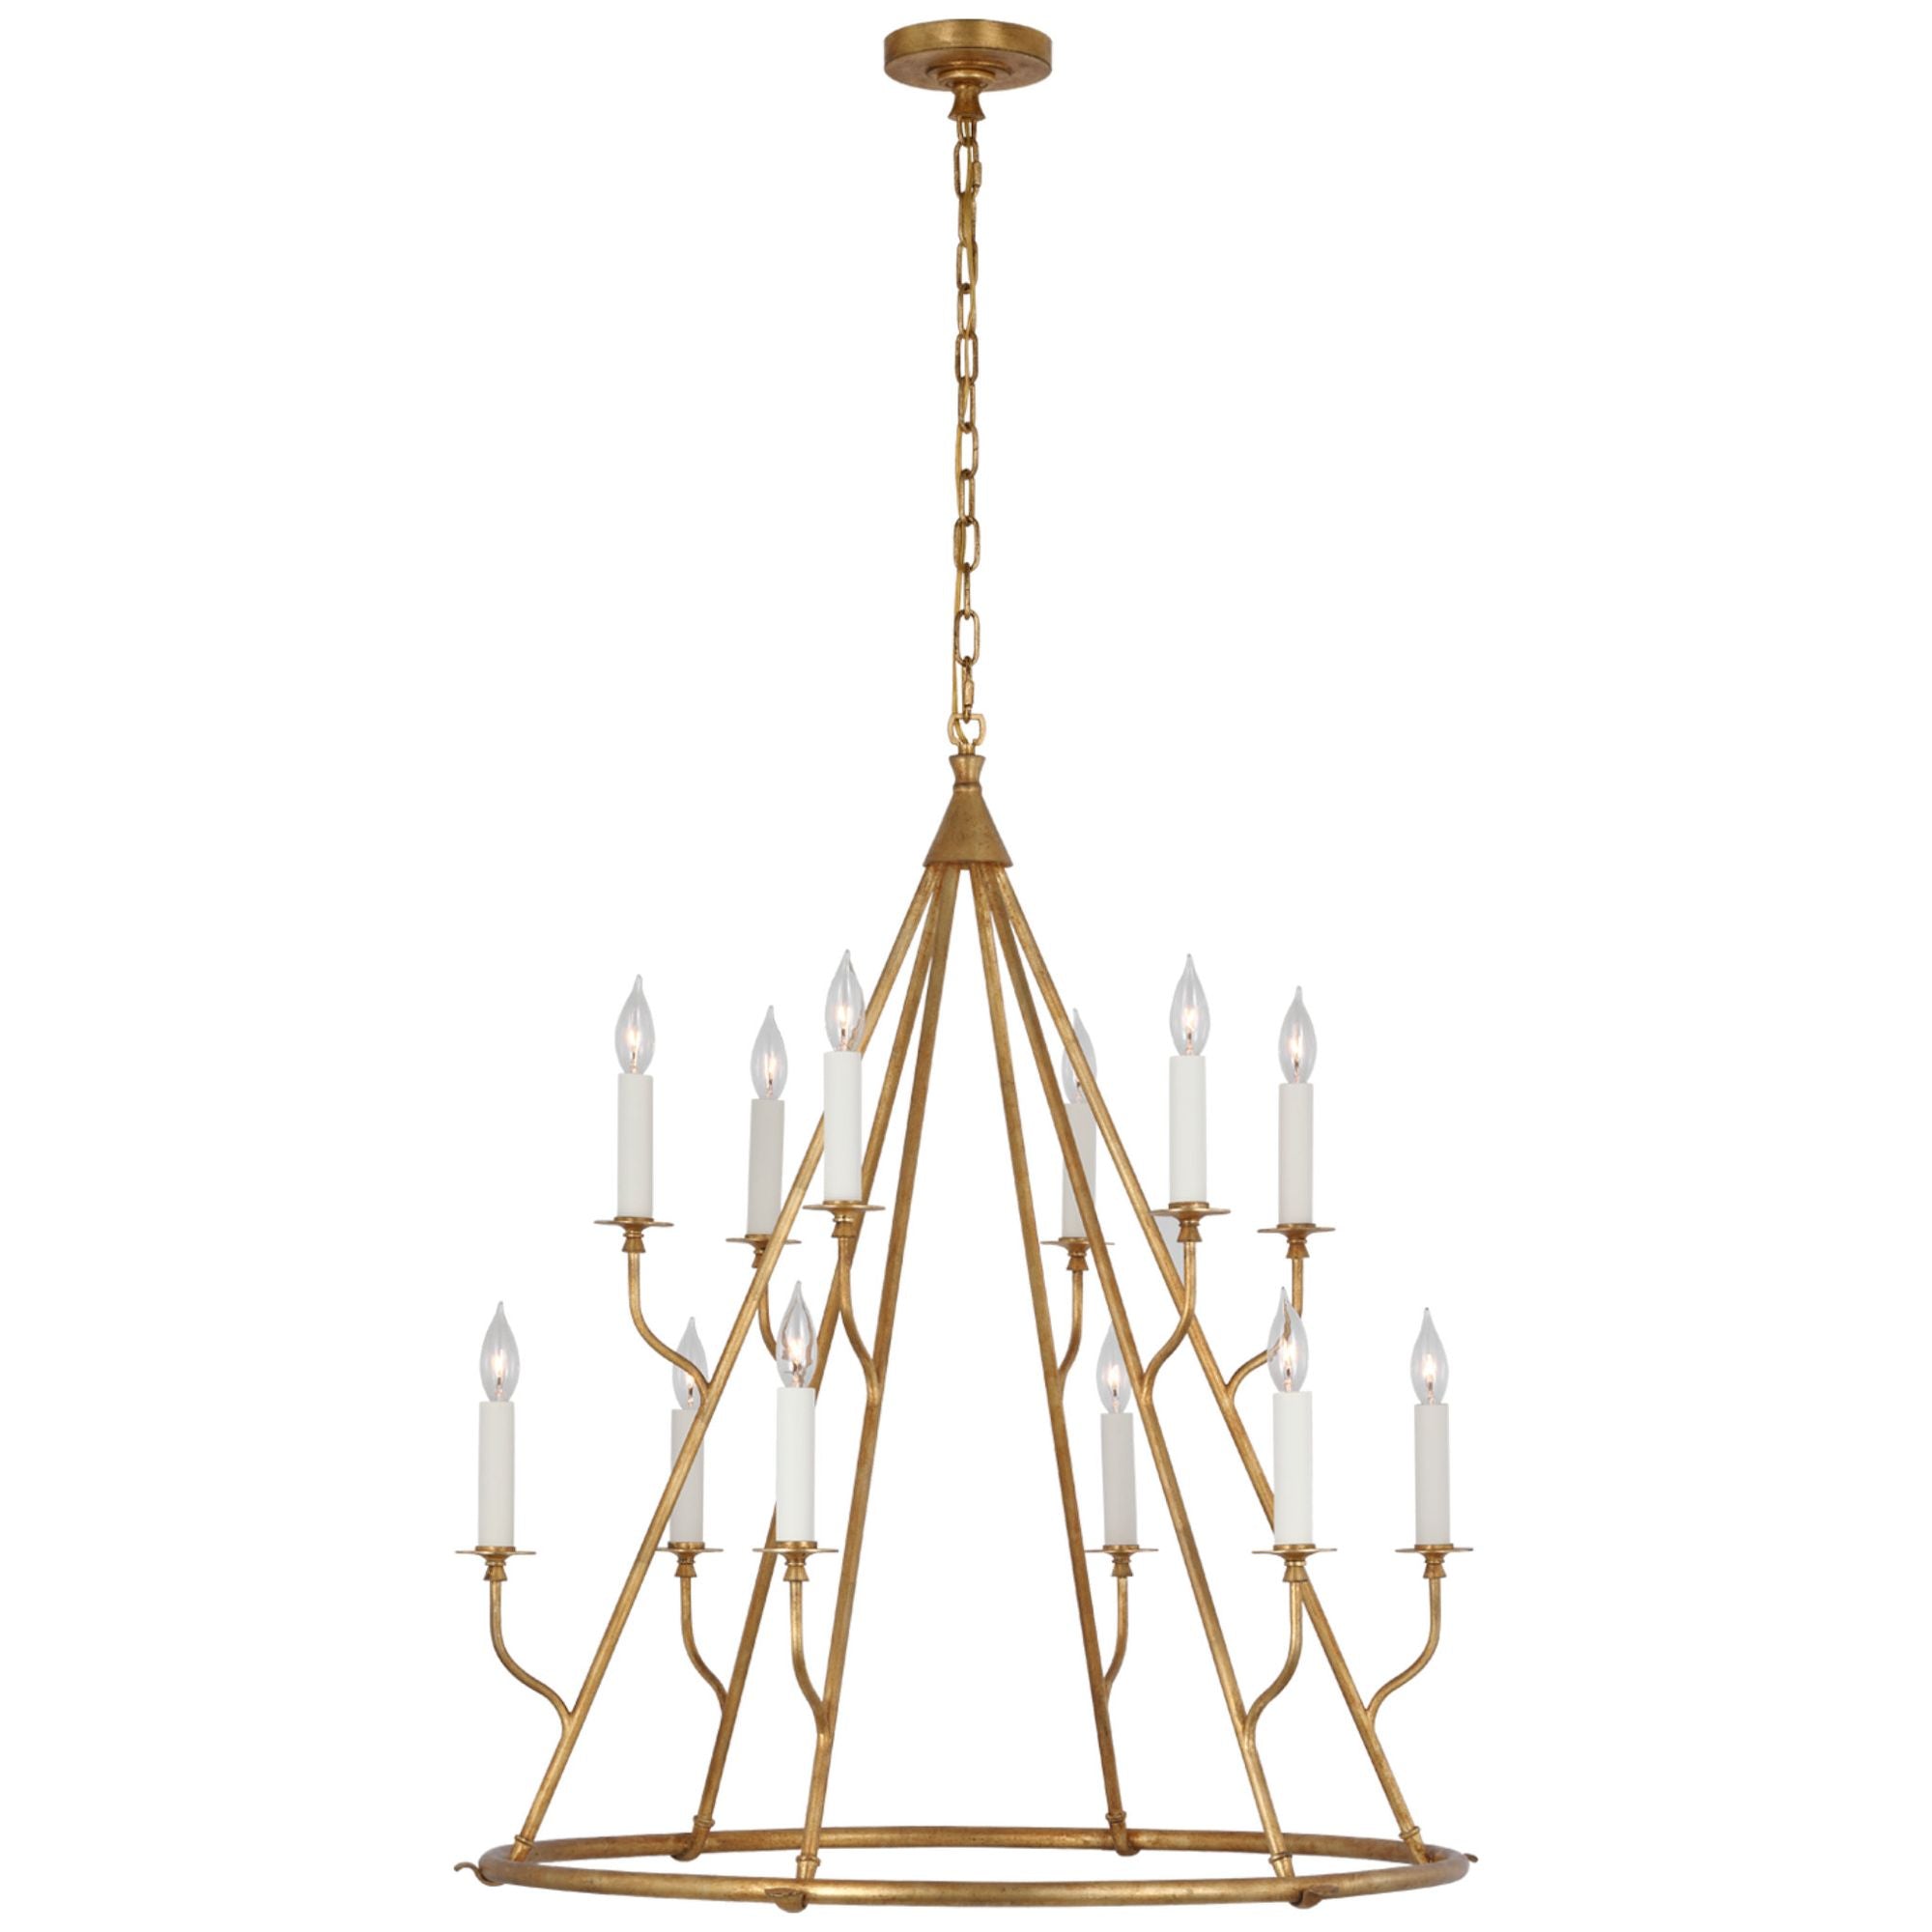 Julie Neill Lorio Large Chandelier in Gilded Iron